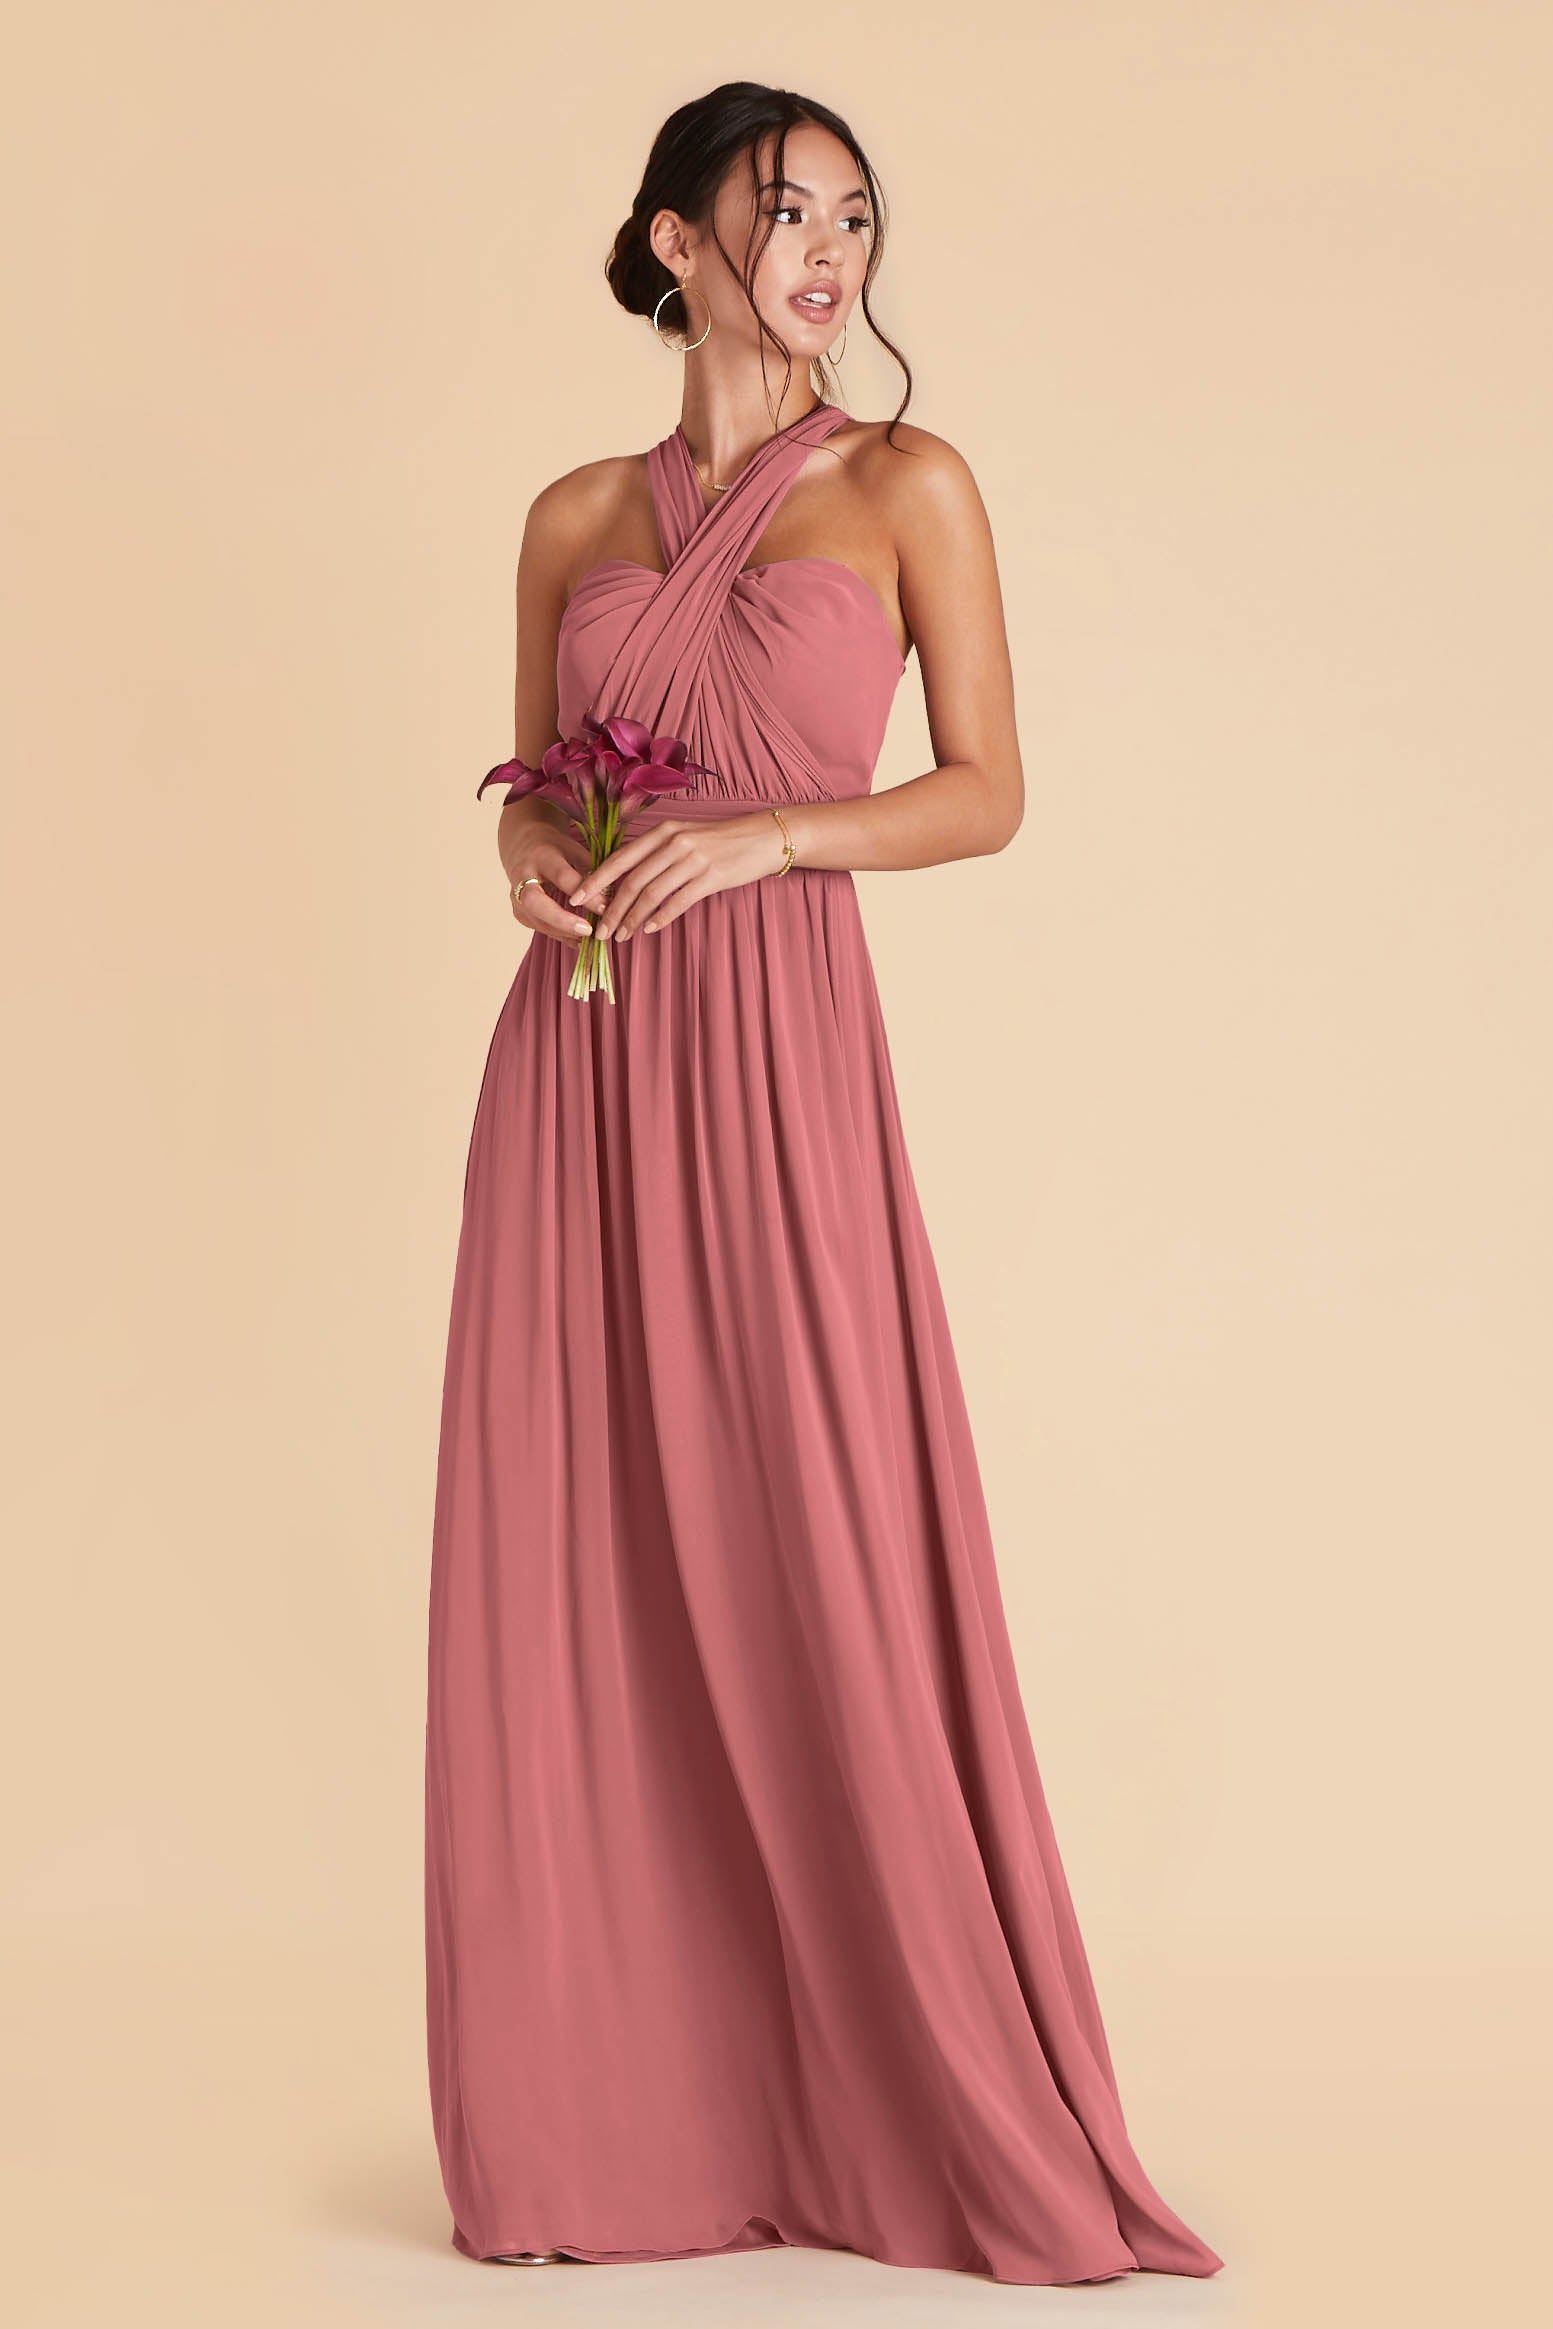 Grace convertible bridesmaid dress in Mulberry Chiffon by Birdy Grey, front view